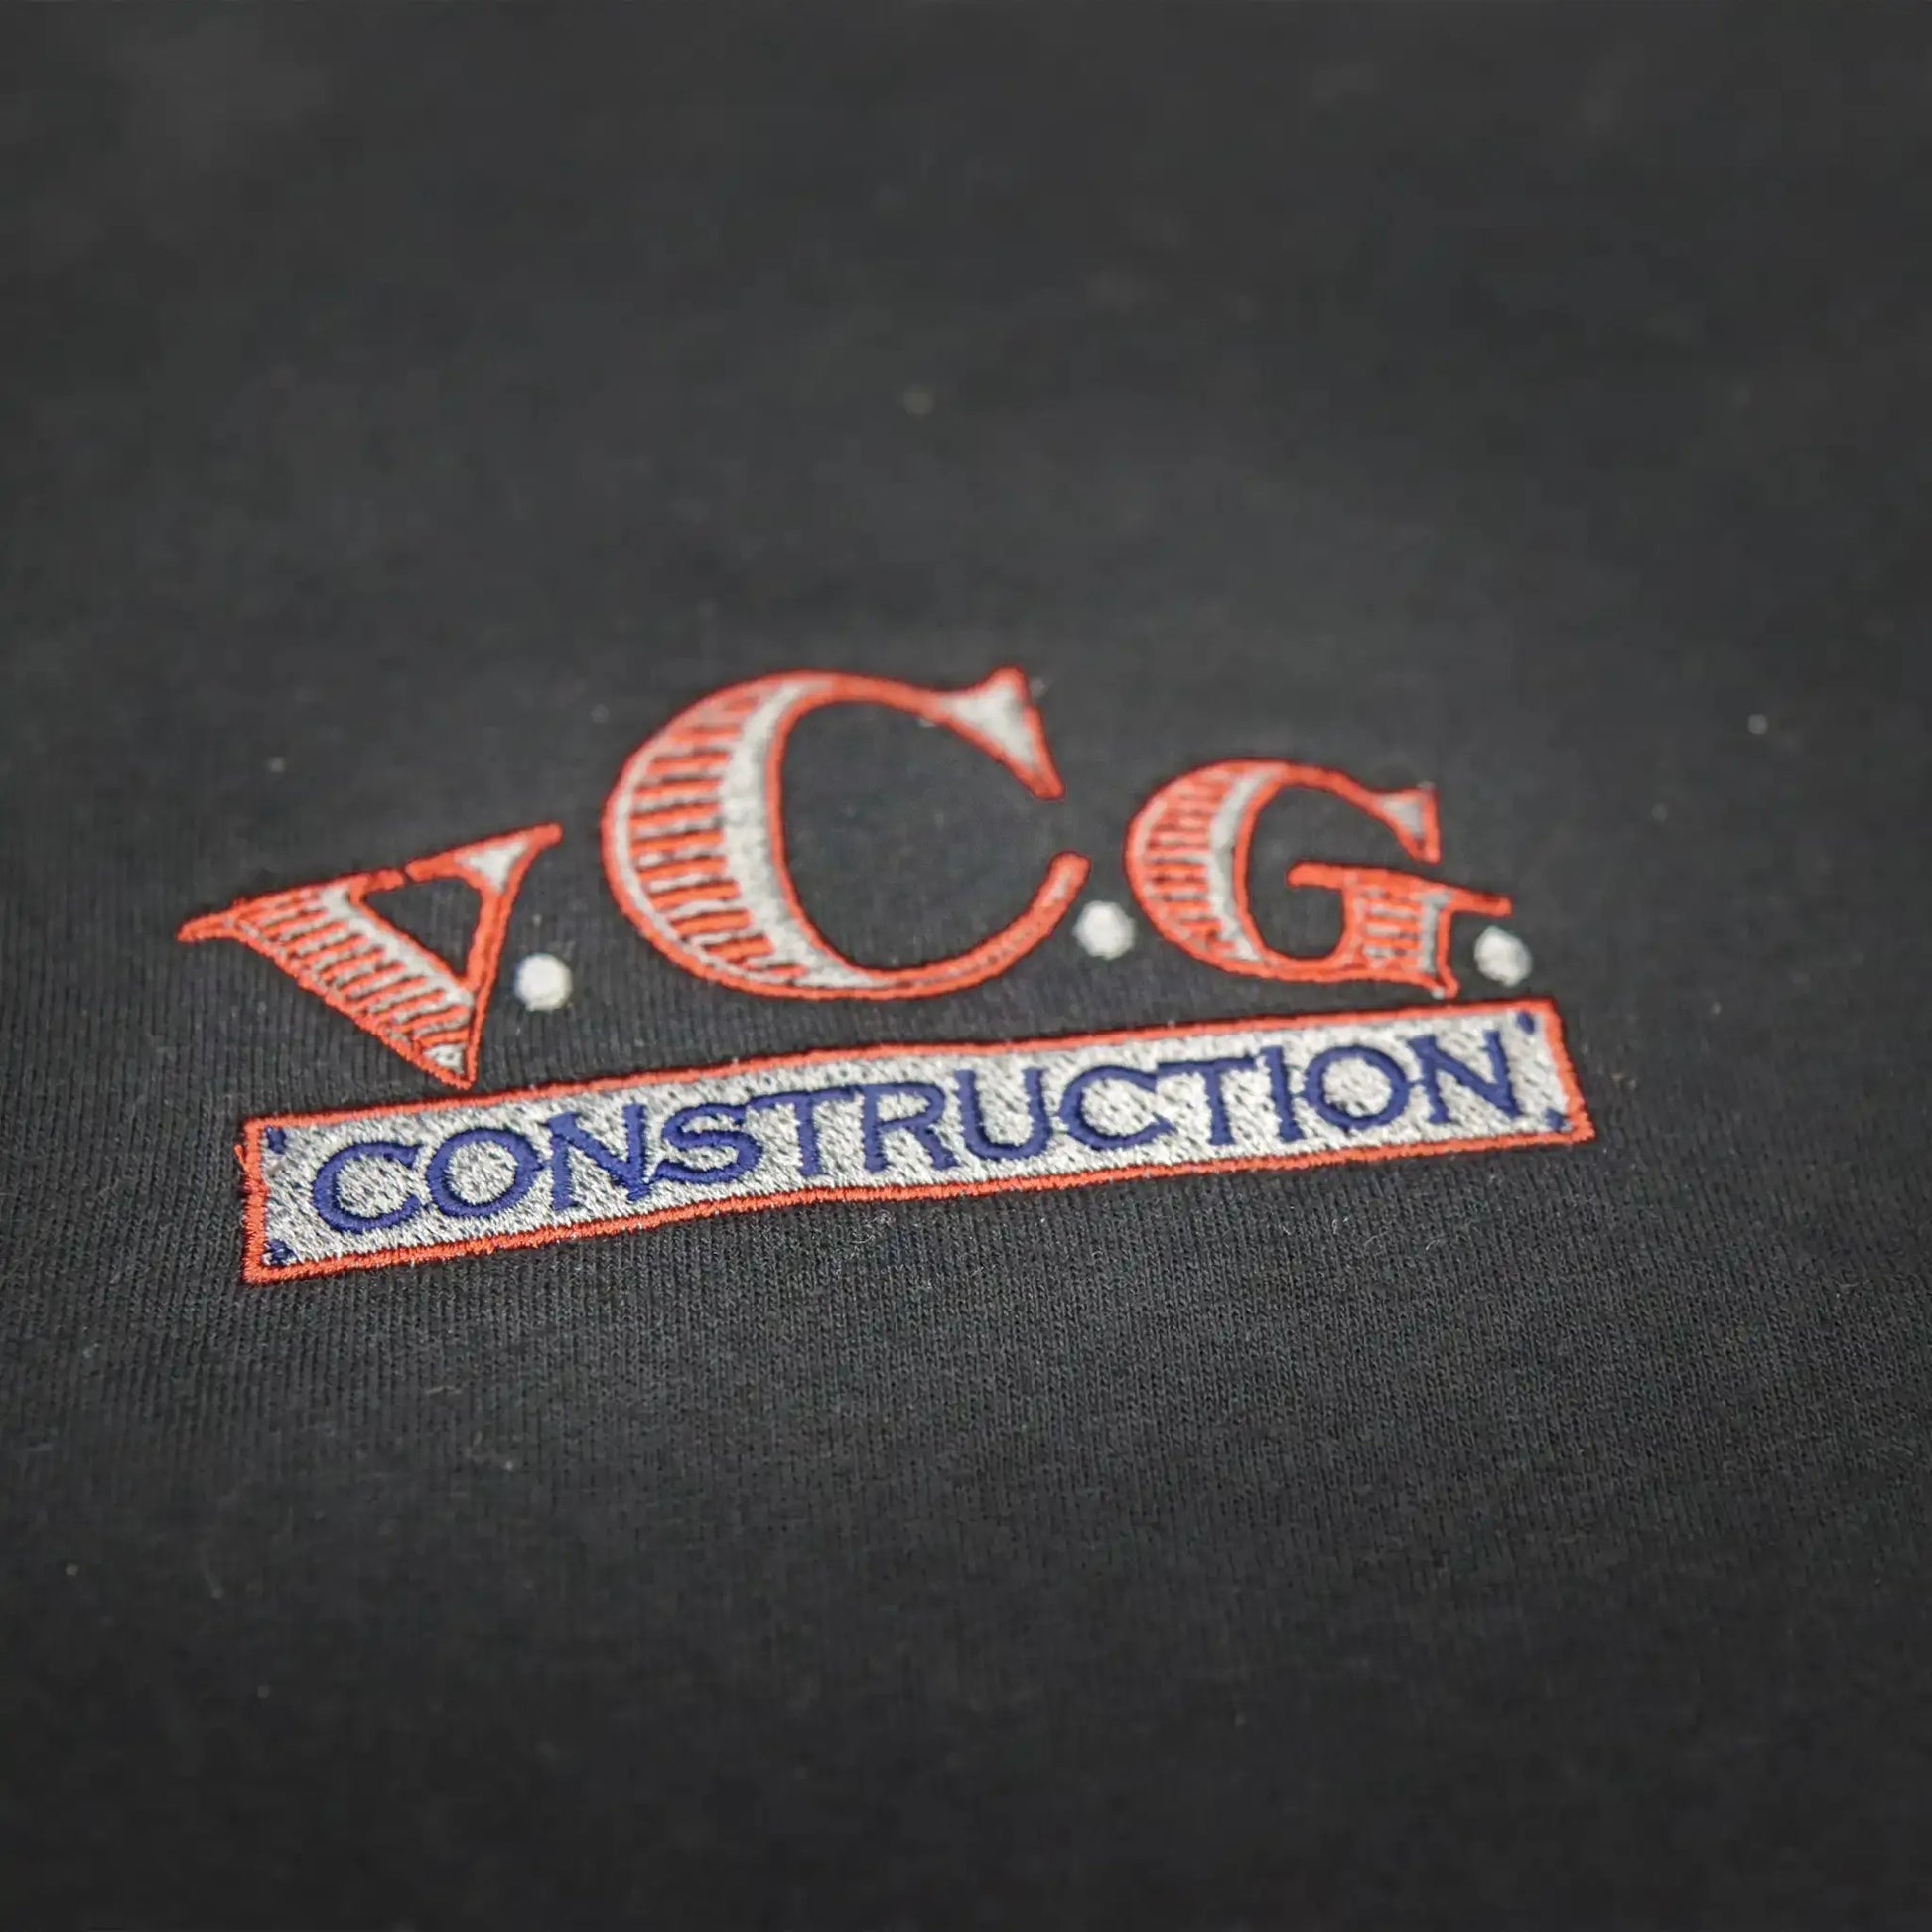 Limited Edition Black T-Shirt featuring the MISPRINTS VCG Construction Logo Embroidery. Save big with this exclusive offer on misprinted items. Limited quantities available, grab yours now and make a statement in unique style